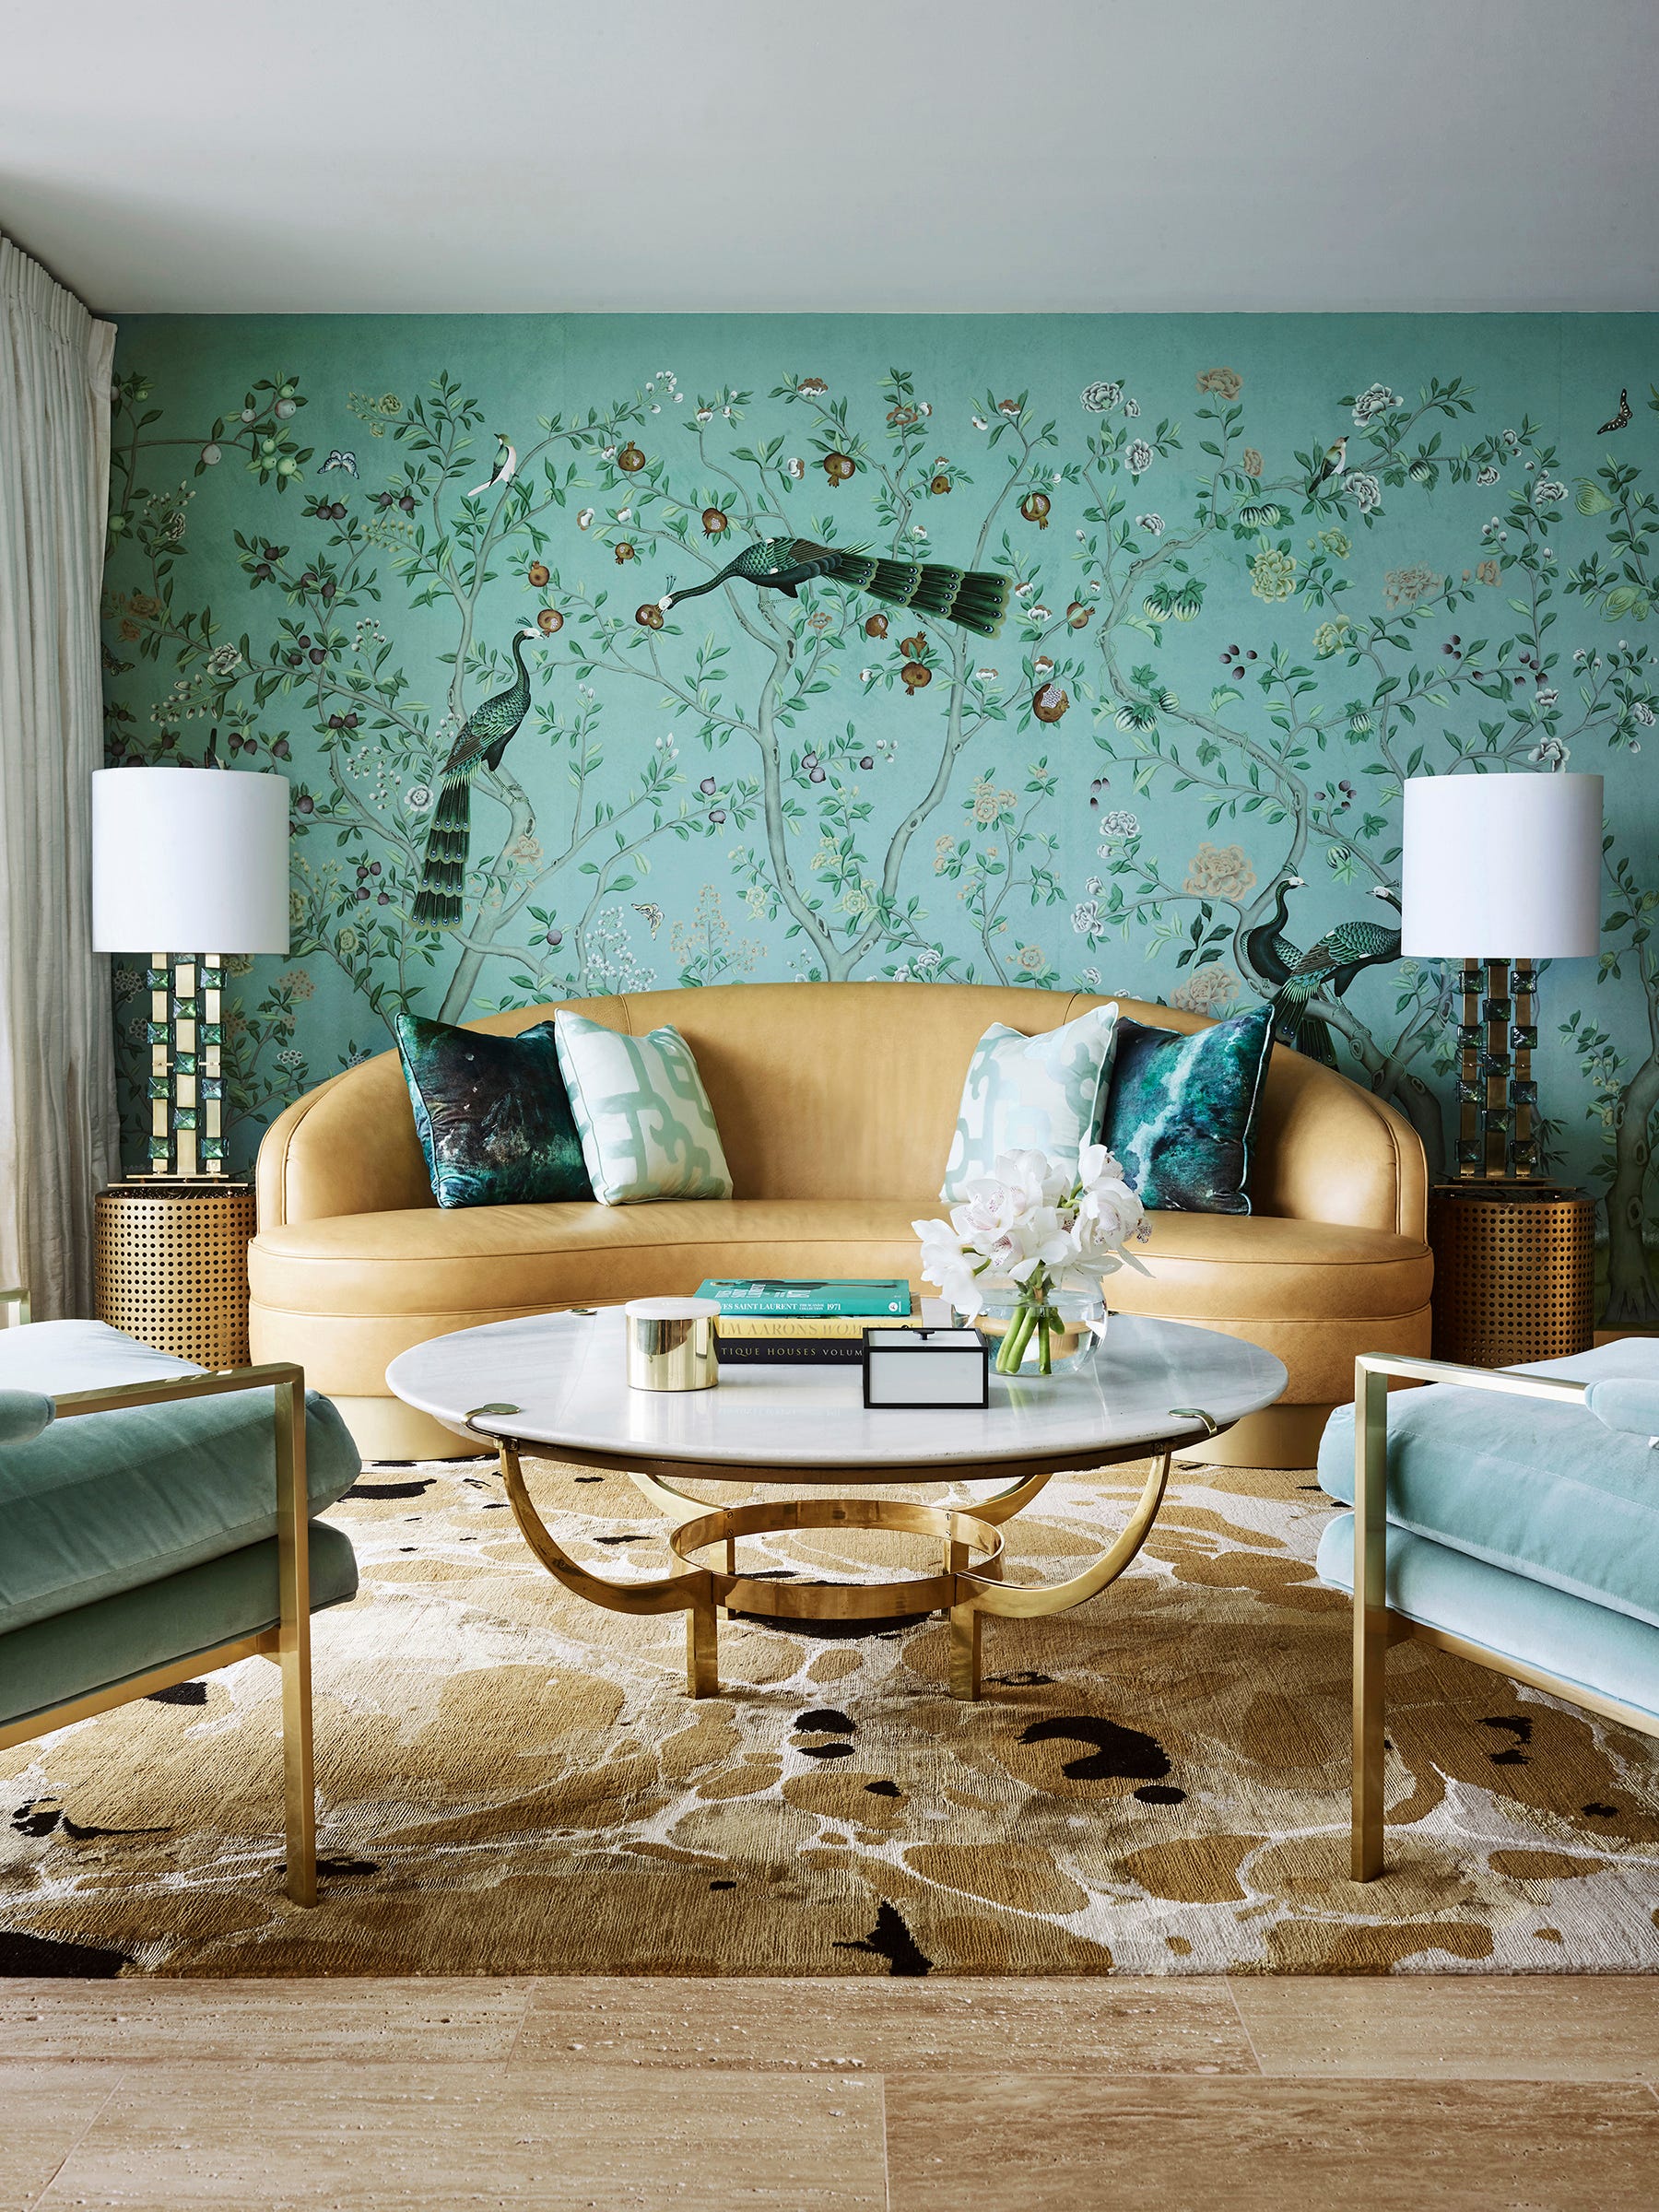 A hand-painted de Gournay wallcovering is paired with the organic Ink rug from Greg Natale's collection. The rug's warm tones carry over to the curved camel leather Dorothy Draper sofa and brass frame of the vintage coffee table, from Conley and Co., and the frame of the two chairs upholstered in velvet. This use of pattern is one of the designer's favorites, especially the vivid scene of birds that are both delicate and compelling. It's "pattern as its most extravagant," Natale says.